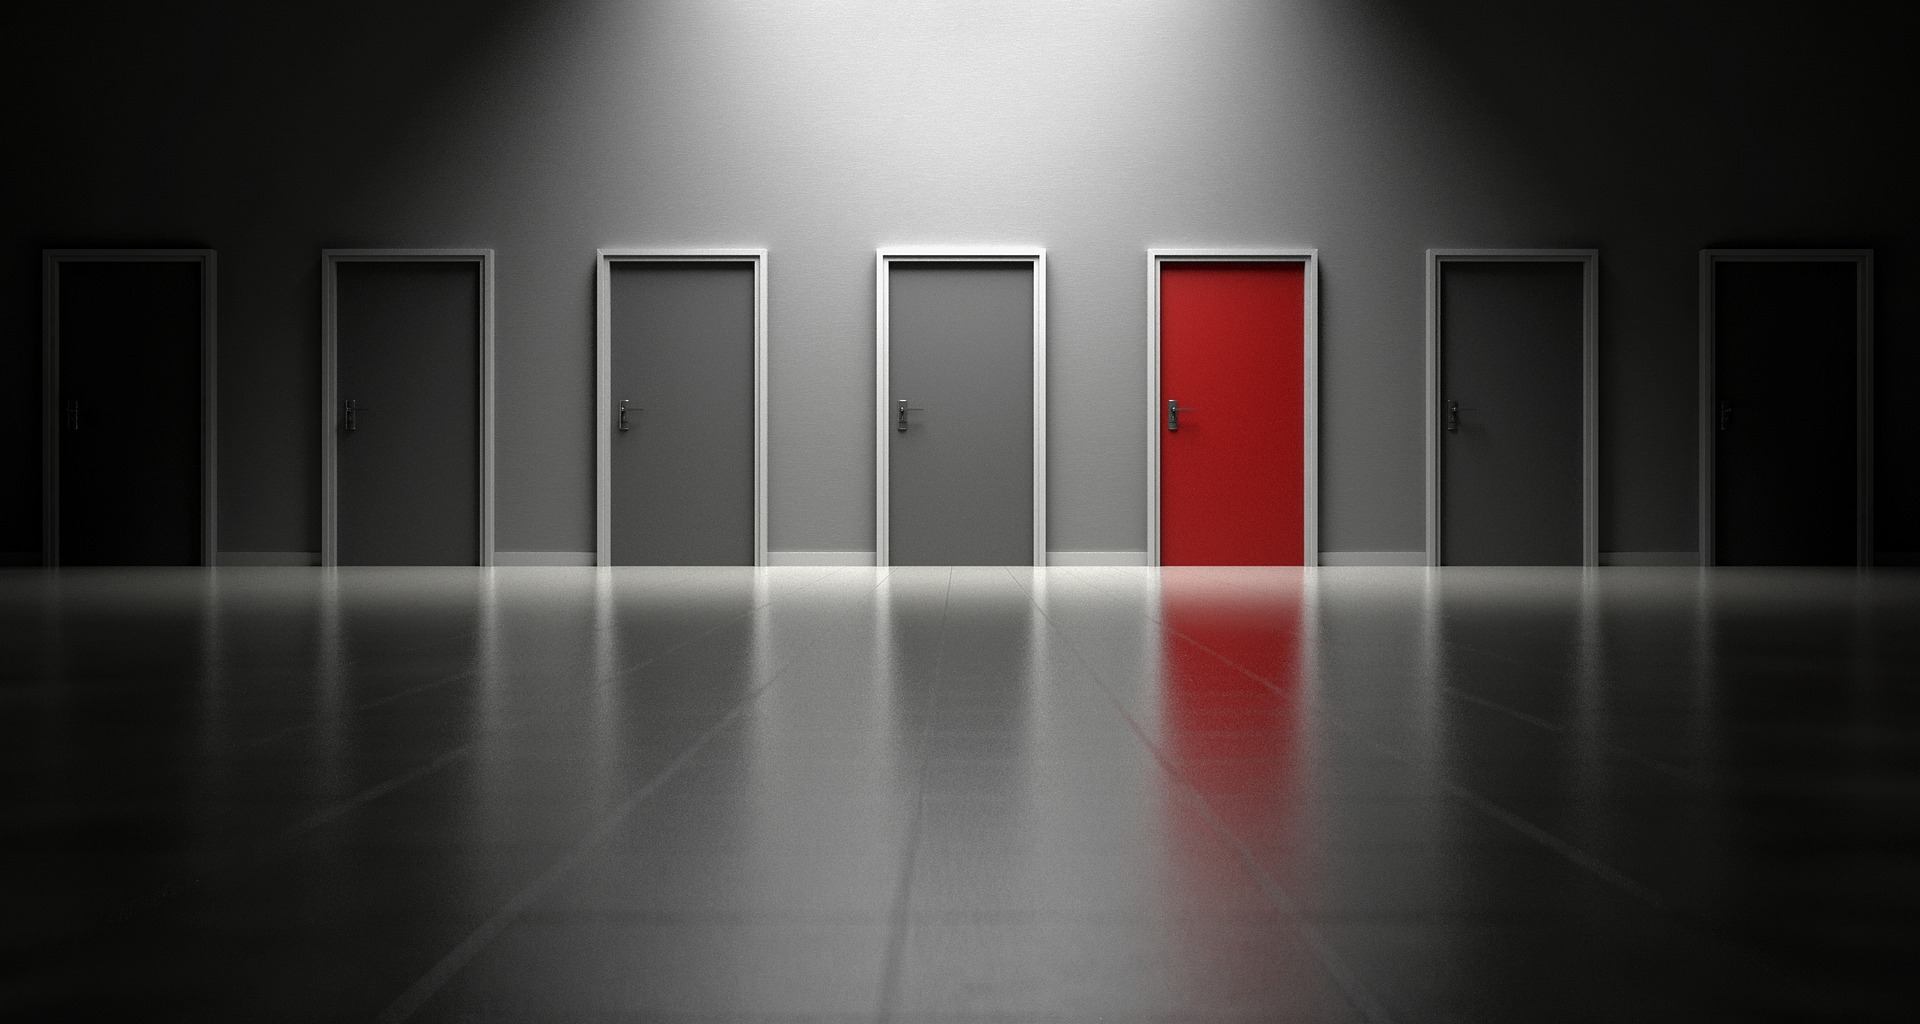 A row of doors, all in shades of grey except one red door. Copyright: Pixabay